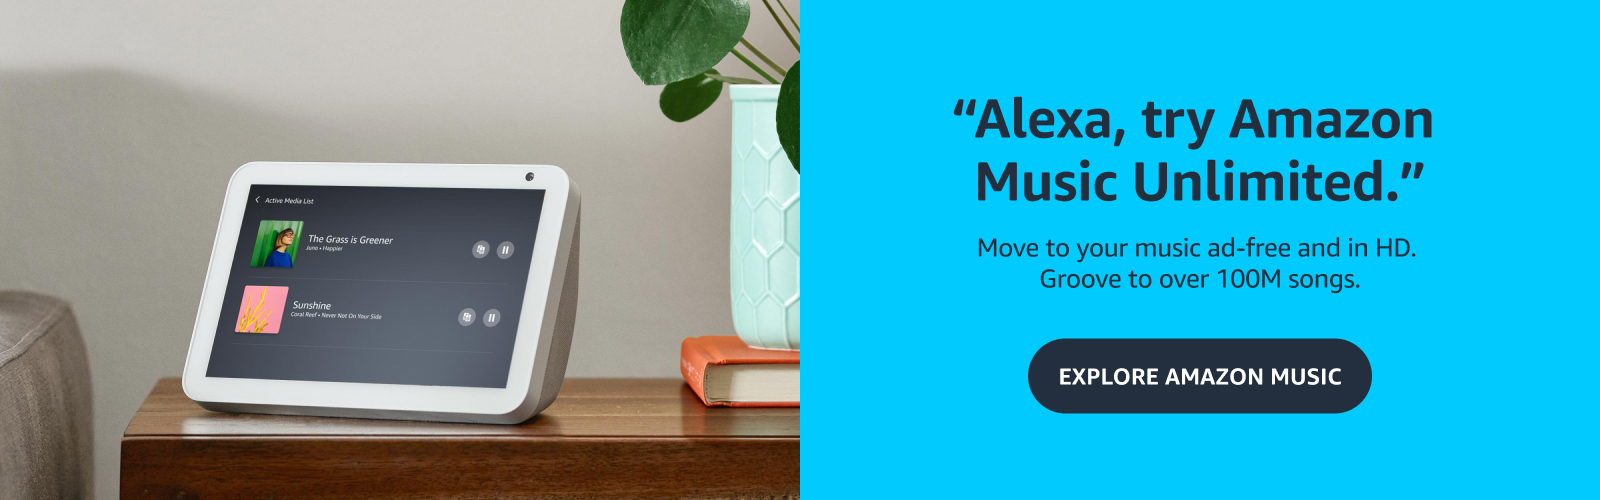 "Alexa, try Amazon Music Unlimited." 

Move to your music ad-free and in HD. Groove to over 100M songs.

Explore Amazon music.